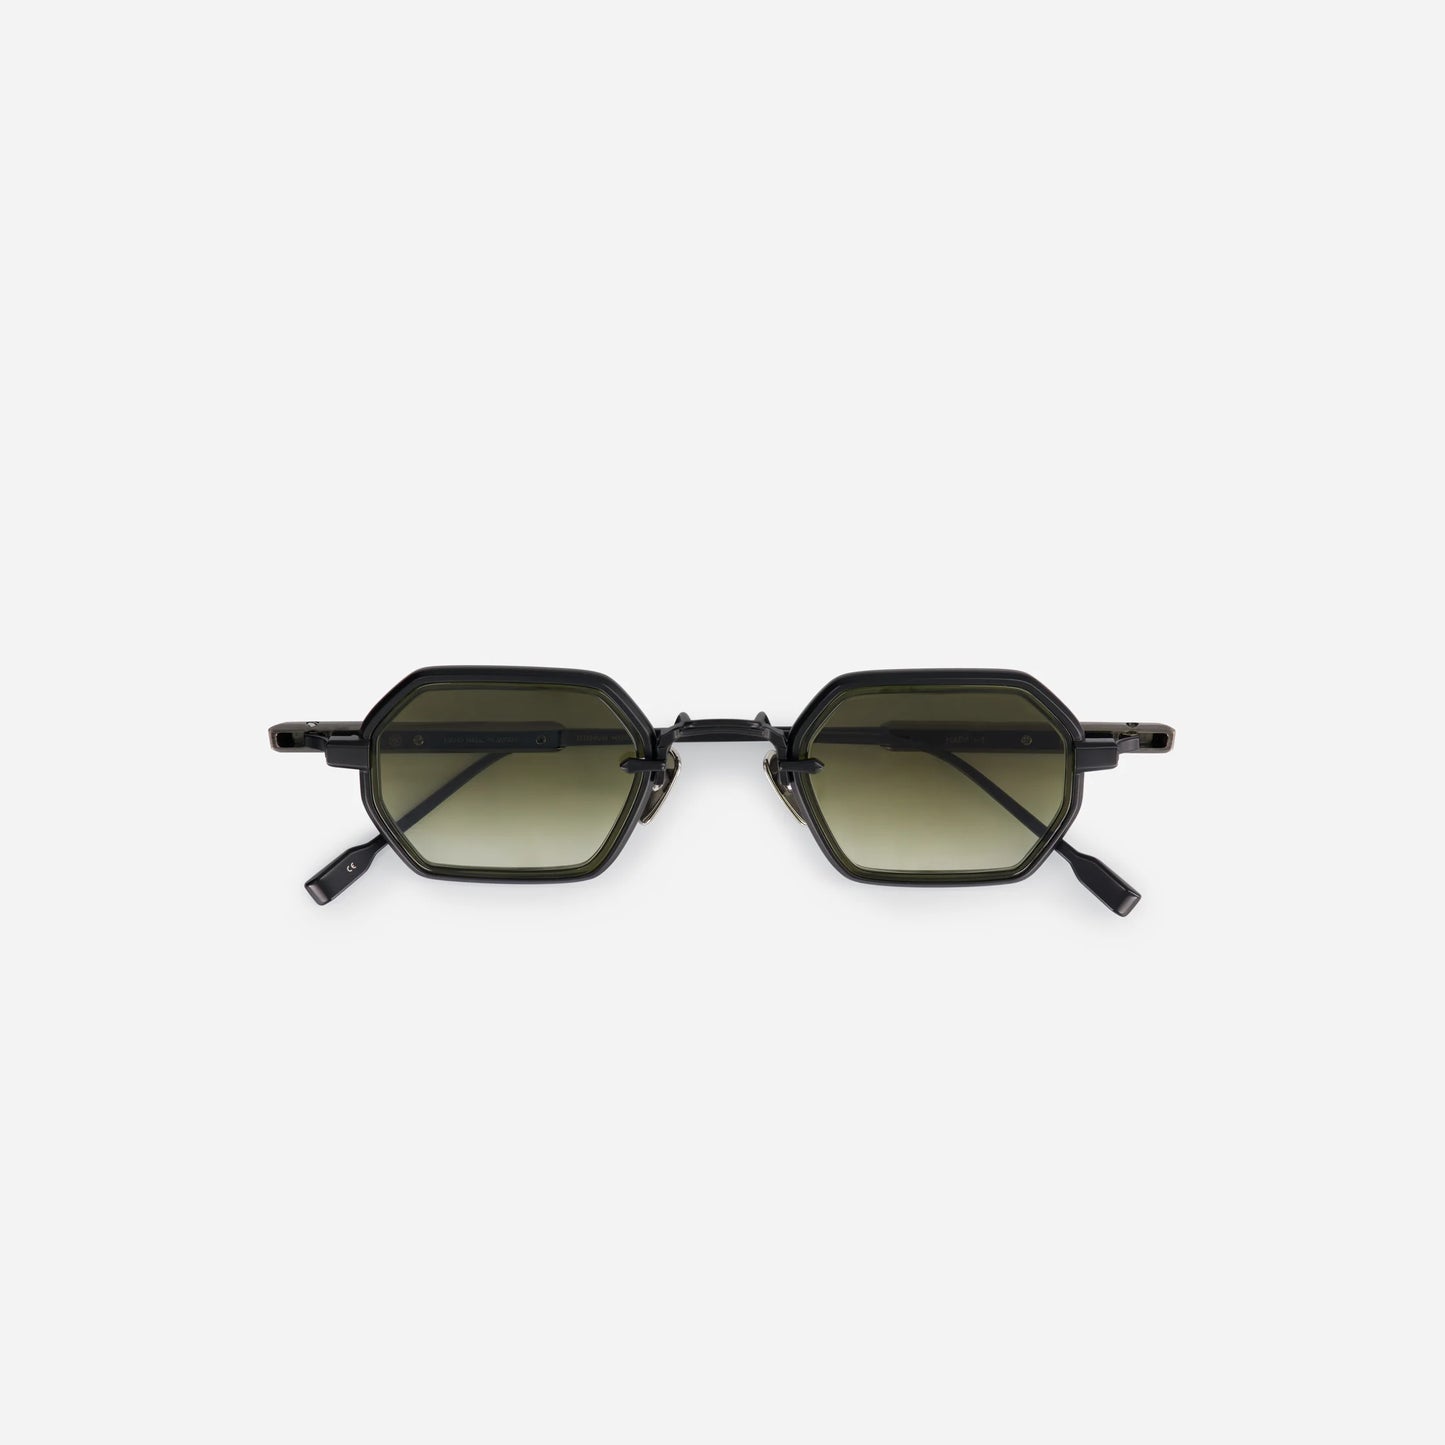 The Hadar-T B/AS-1 features a titanium frame with black mat and antique silver coating, a green olive takiron rim insert, and gradient green lenses.